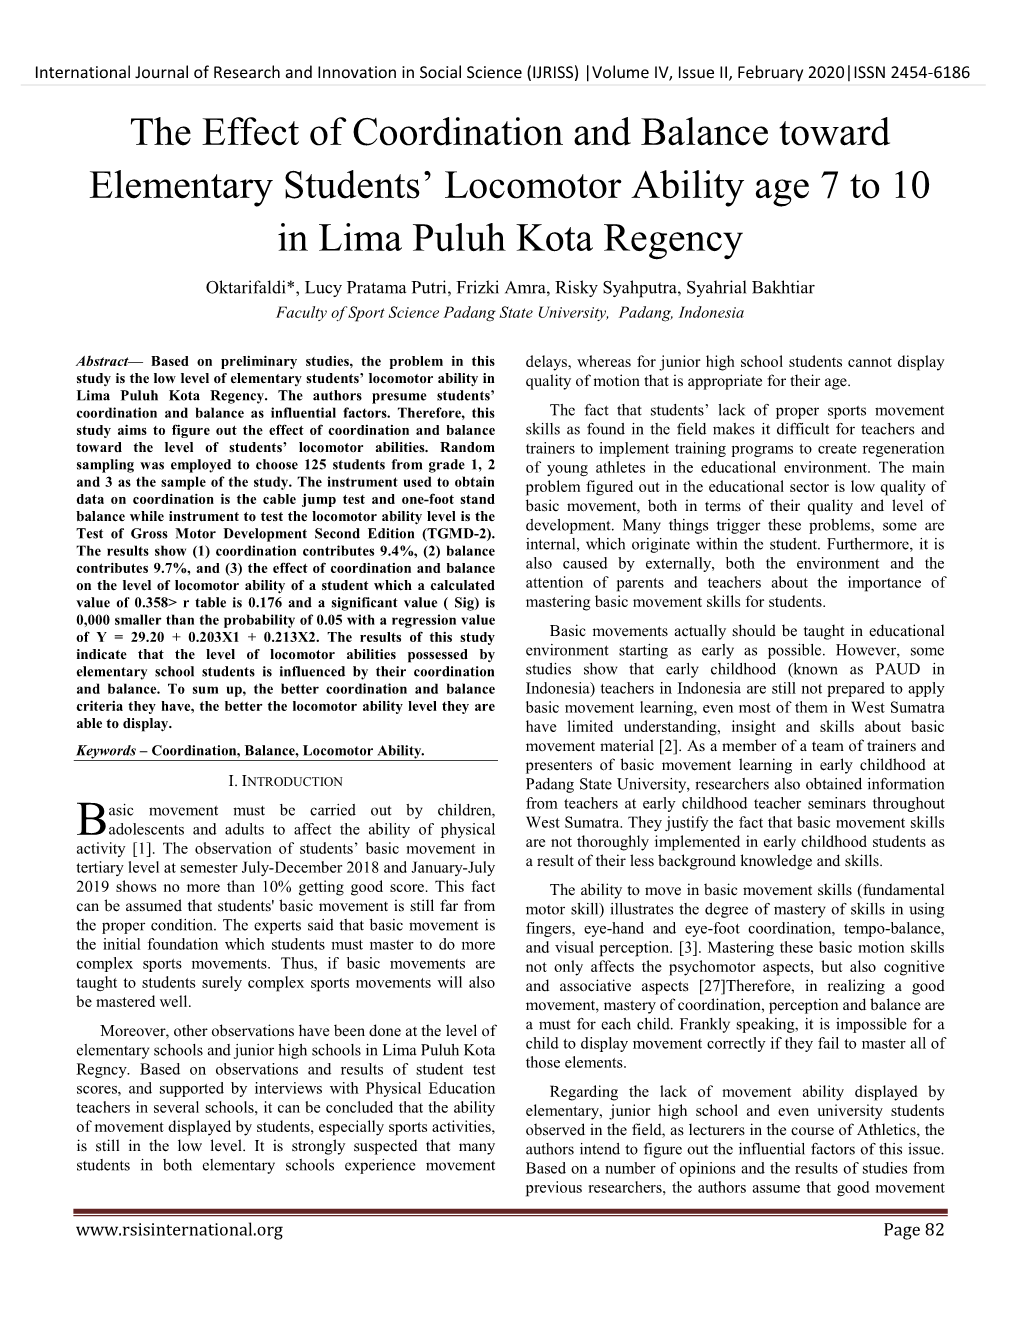 The Effect of Coordination and Balance Toward Elementary Students’ Locomotor Ability Age 7 to 10 in Lima Puluh Kota Regency